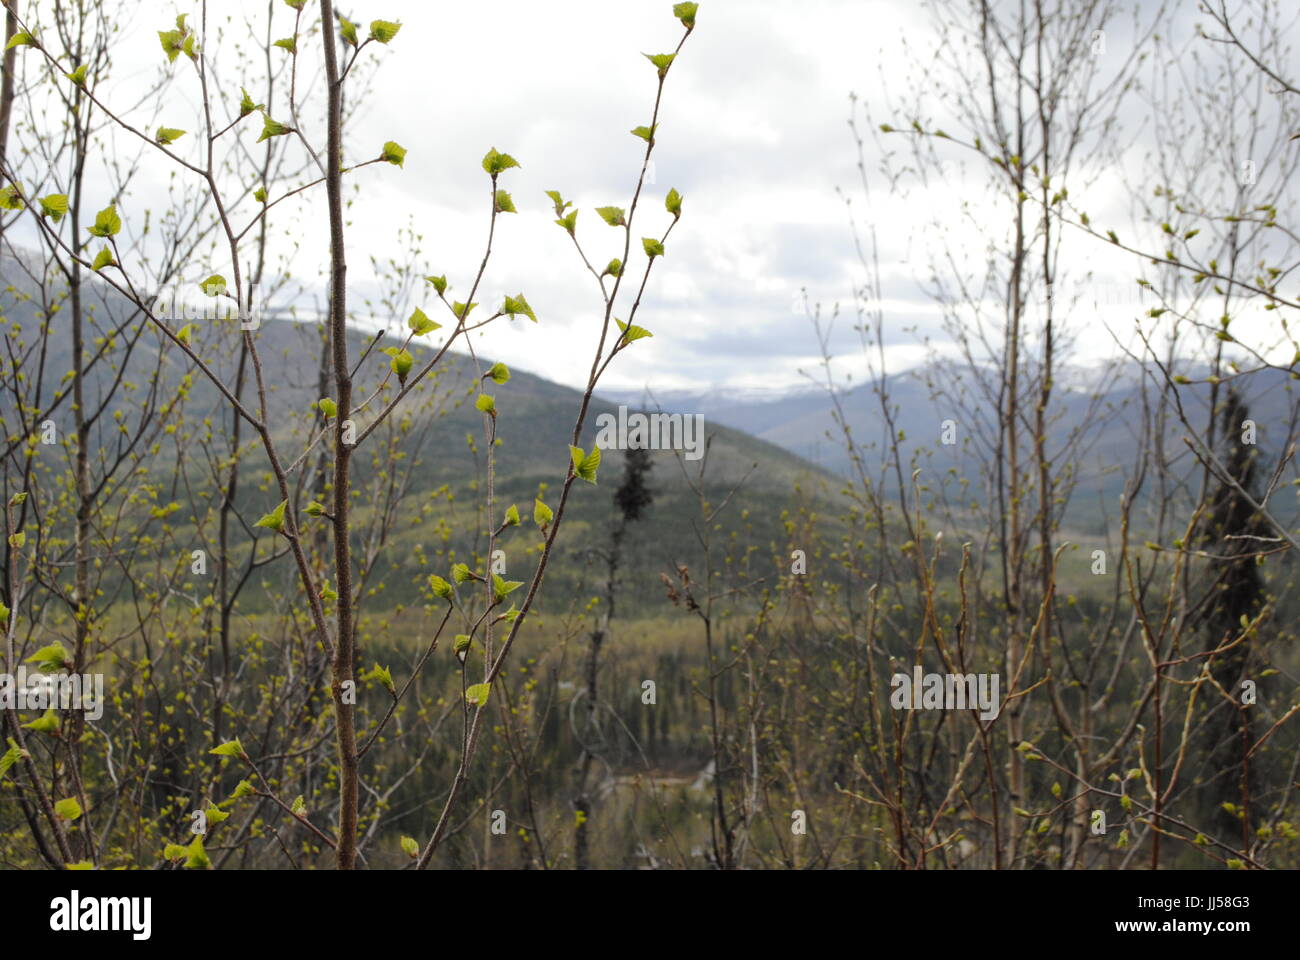 Spring buds on young Birch trees in Mid-May. Spring comes late in Interior Alaska as the snow on distant hilltops and new green shows. Stock Photo